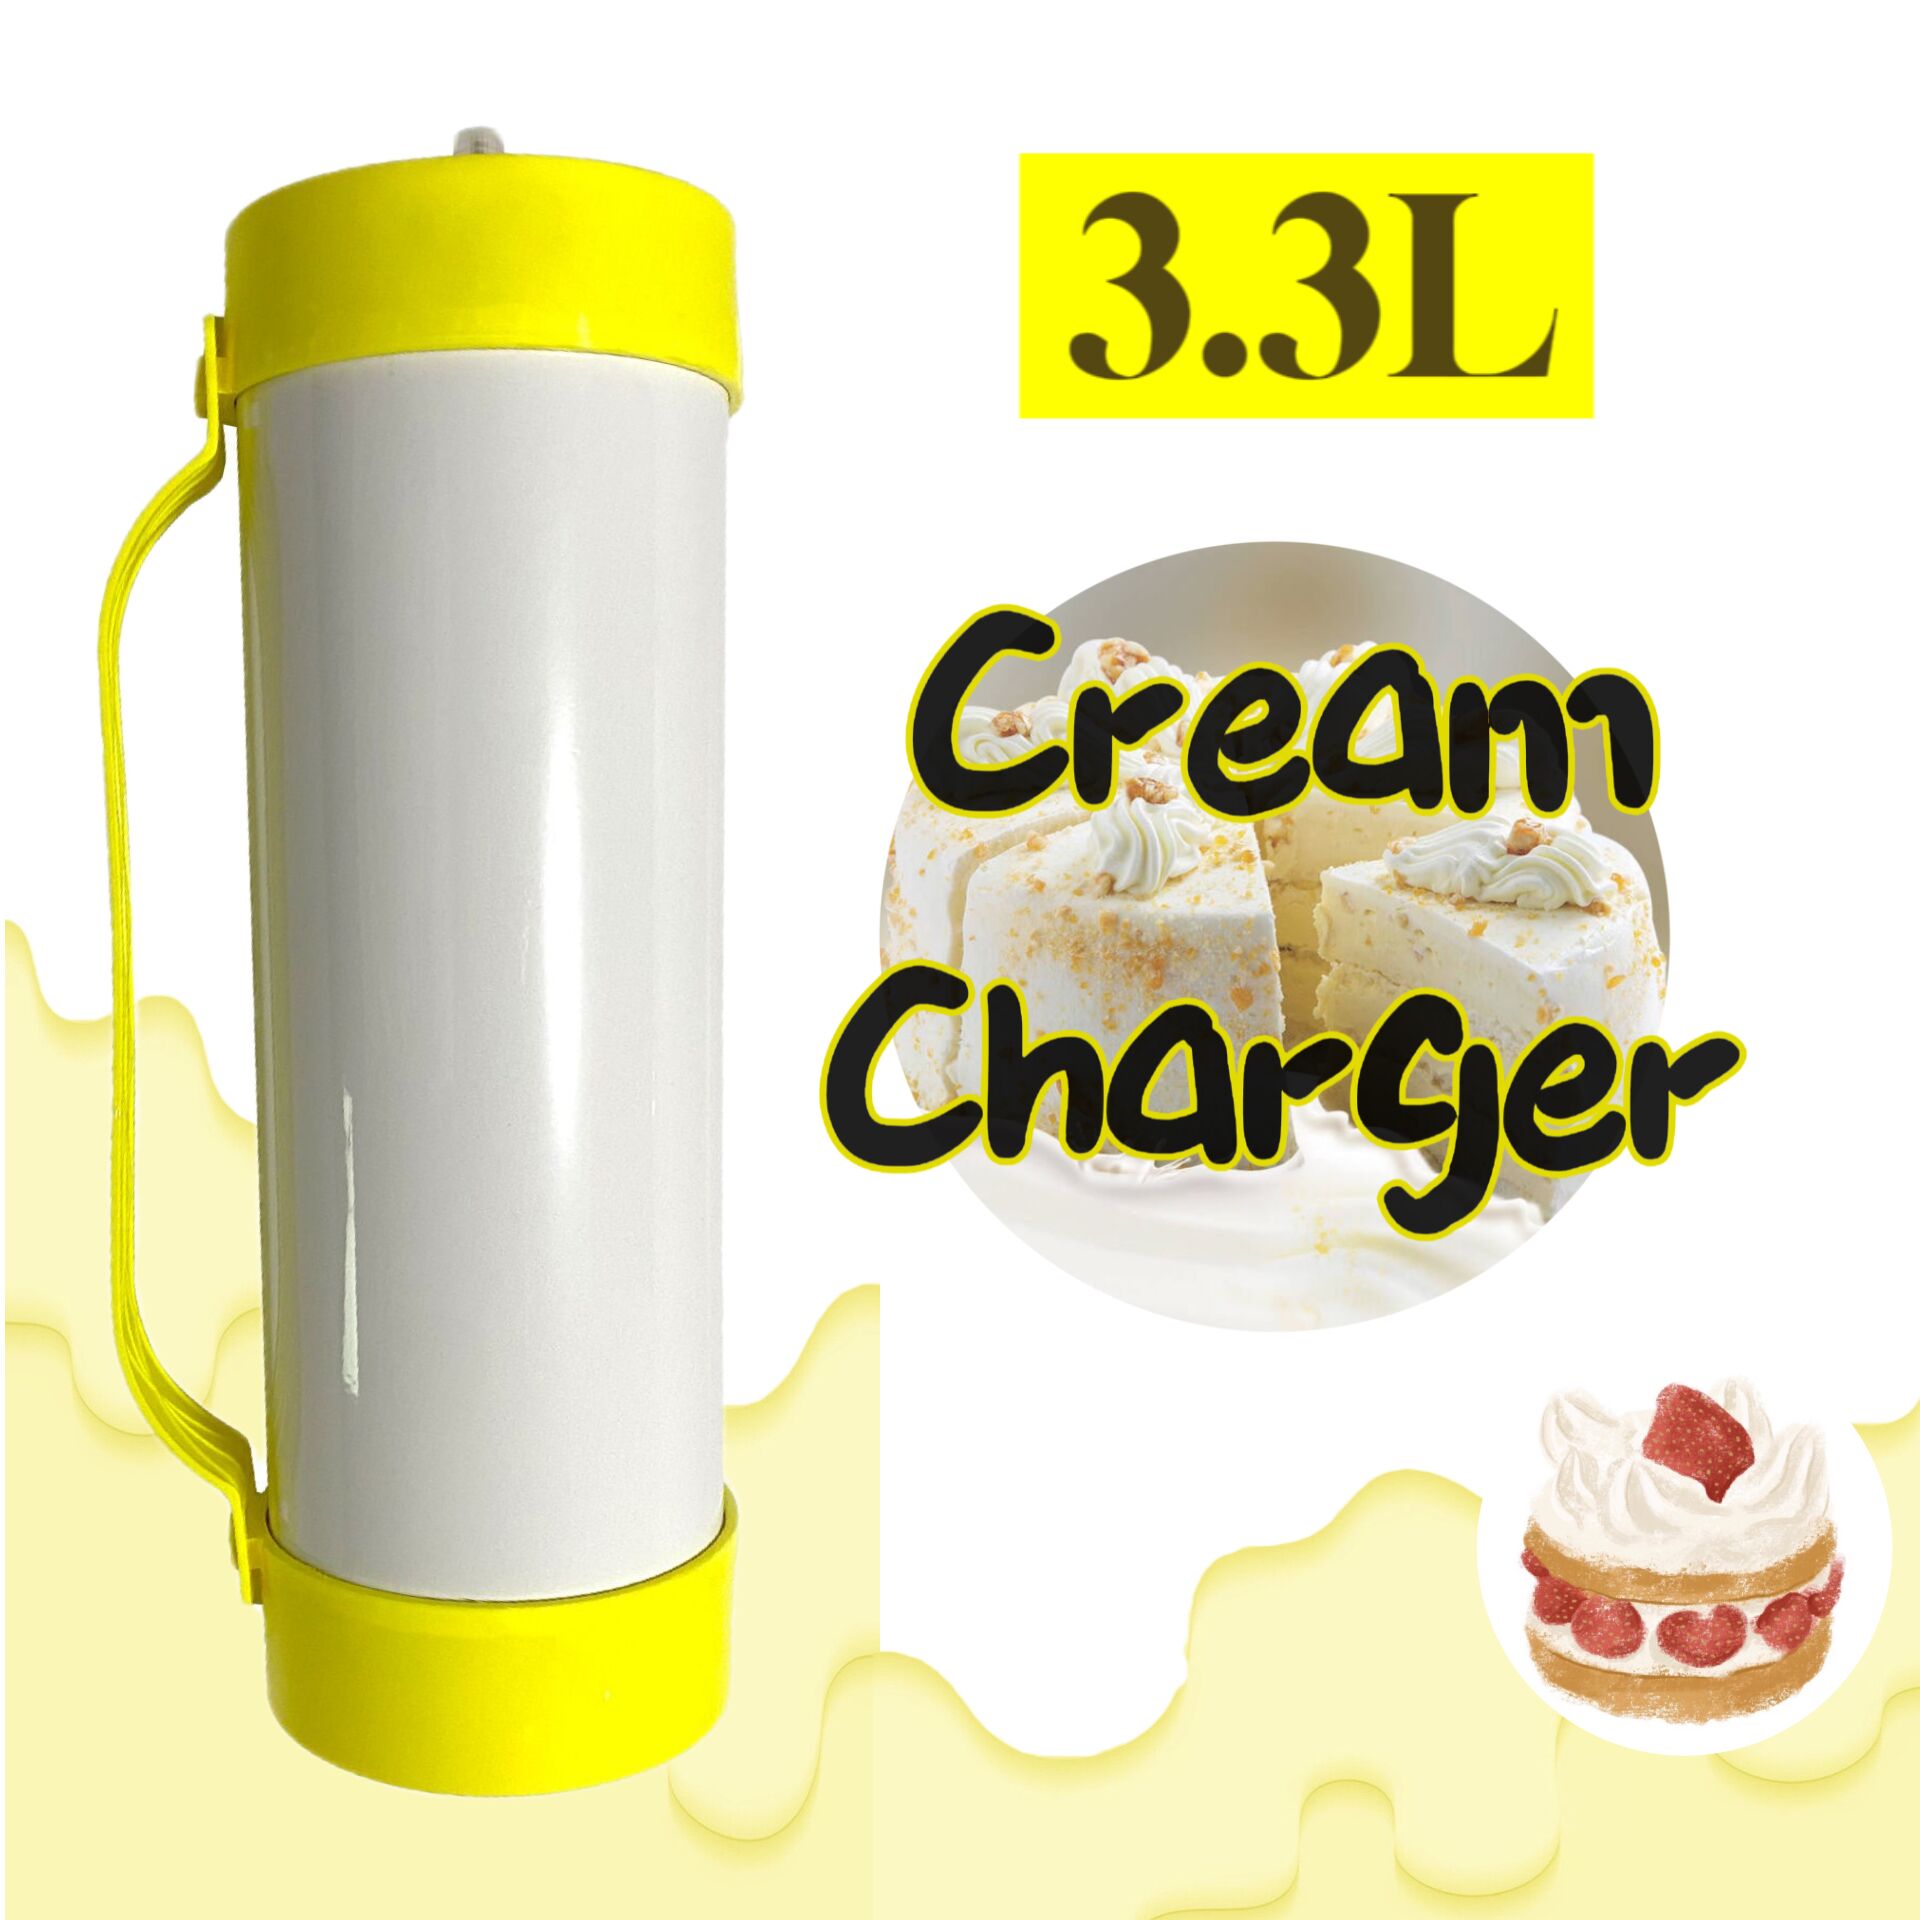 2000g cream charger